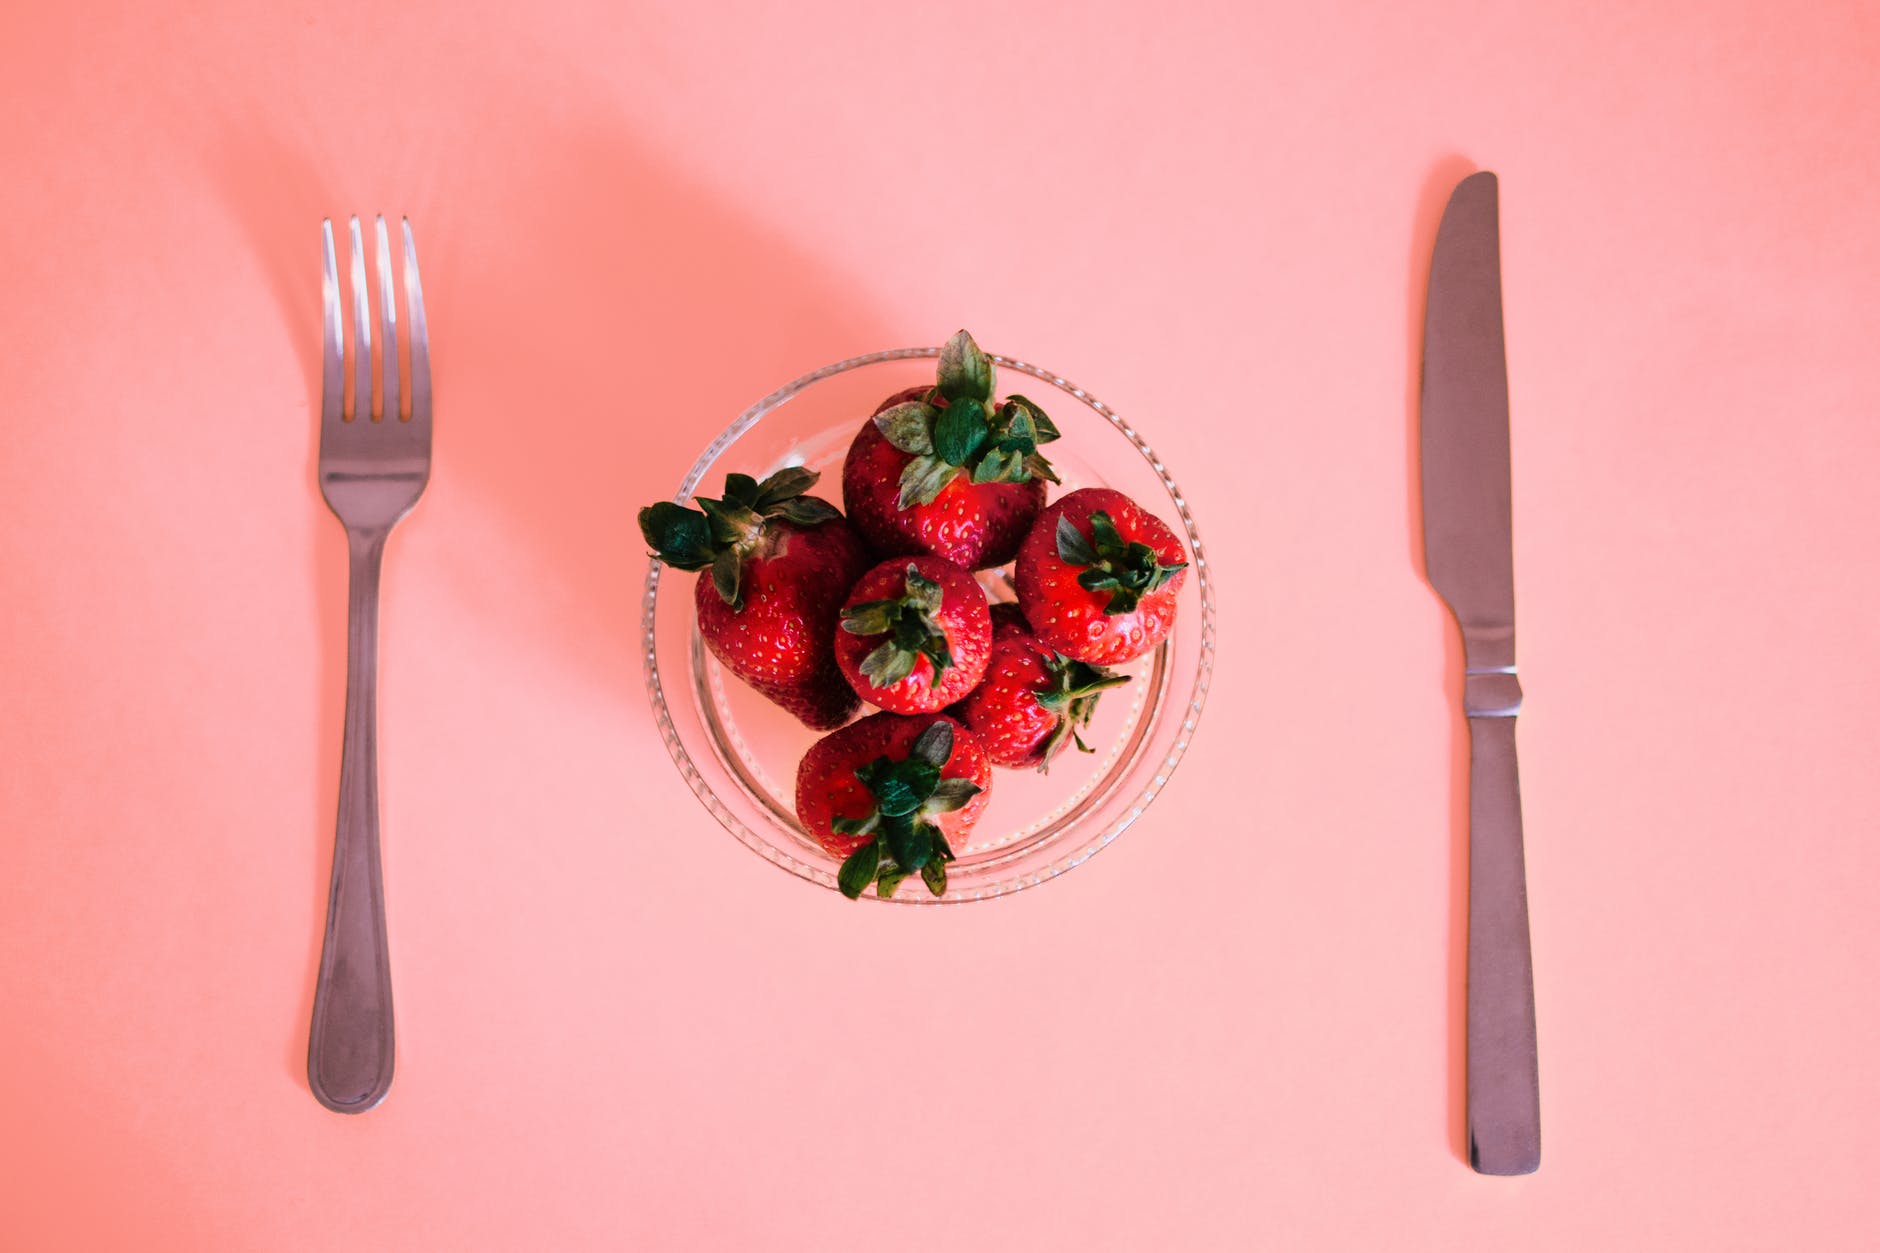 bowl of strawberry in front of dining knife and fork